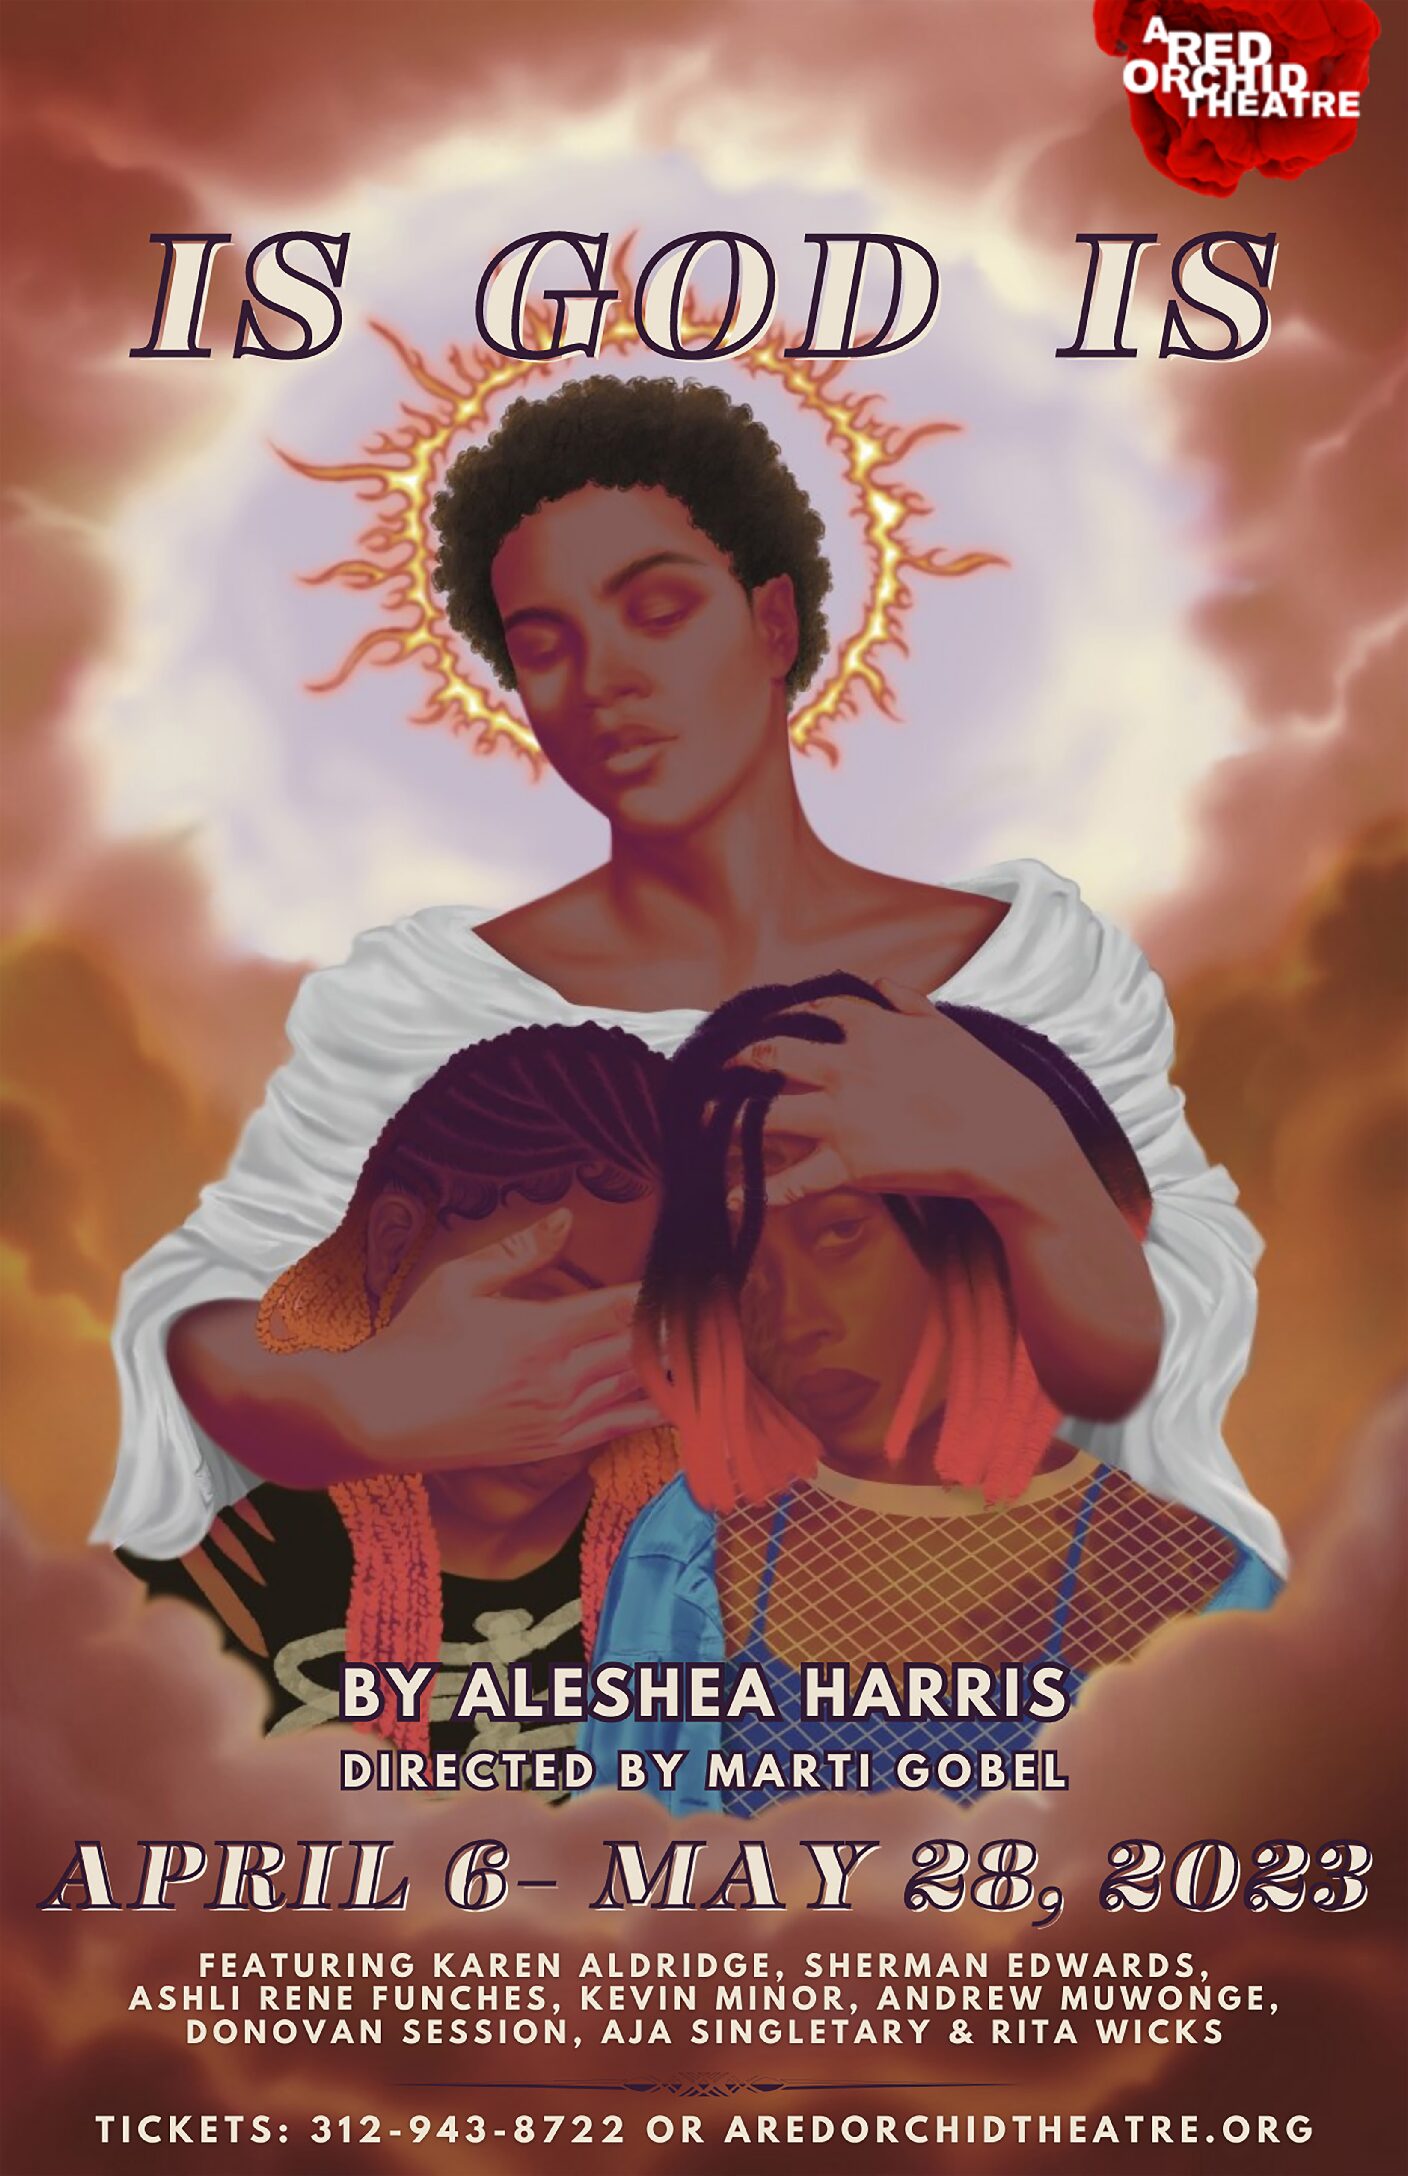 Written by Aleshea Harris
Directed by Marti Gobel
Featuring Ensemble Member Karen Aldridge
Performance Dates: April 6 – June 4, 2023
Press Performances: Saturday April 15
Industry Night: May 8 at 7pm
Open Captioned Performances: May 13 at 3pm & 7:30pm
Black-Out Performance: May 12 at 7:30pm
Audio Described Performance & Touch Tour: May 20 at 3pm
ASL Interpreted Performance: May 21 at 3pm

Chicago Premiere!

When twins Racine and Anaia receive a letter from the mother they thought was dead, they swear to avenge her — and themselves — with blood. Their “mission from God” spans from the Dirty South to the California desert, from hip-hop to Afropunk, from ancient tragedy to the Spaghetti Western. Winner of the 2016 Relentless Award and the 2018 Obie Award for Playwriting, Is God Is asks us to consider the roots and futility of cyclical violence, and to question ourselves for wallowing so happily in stories that traffic in it.

Run time: Approx. 1 hour & 40 minutes (no intermission)